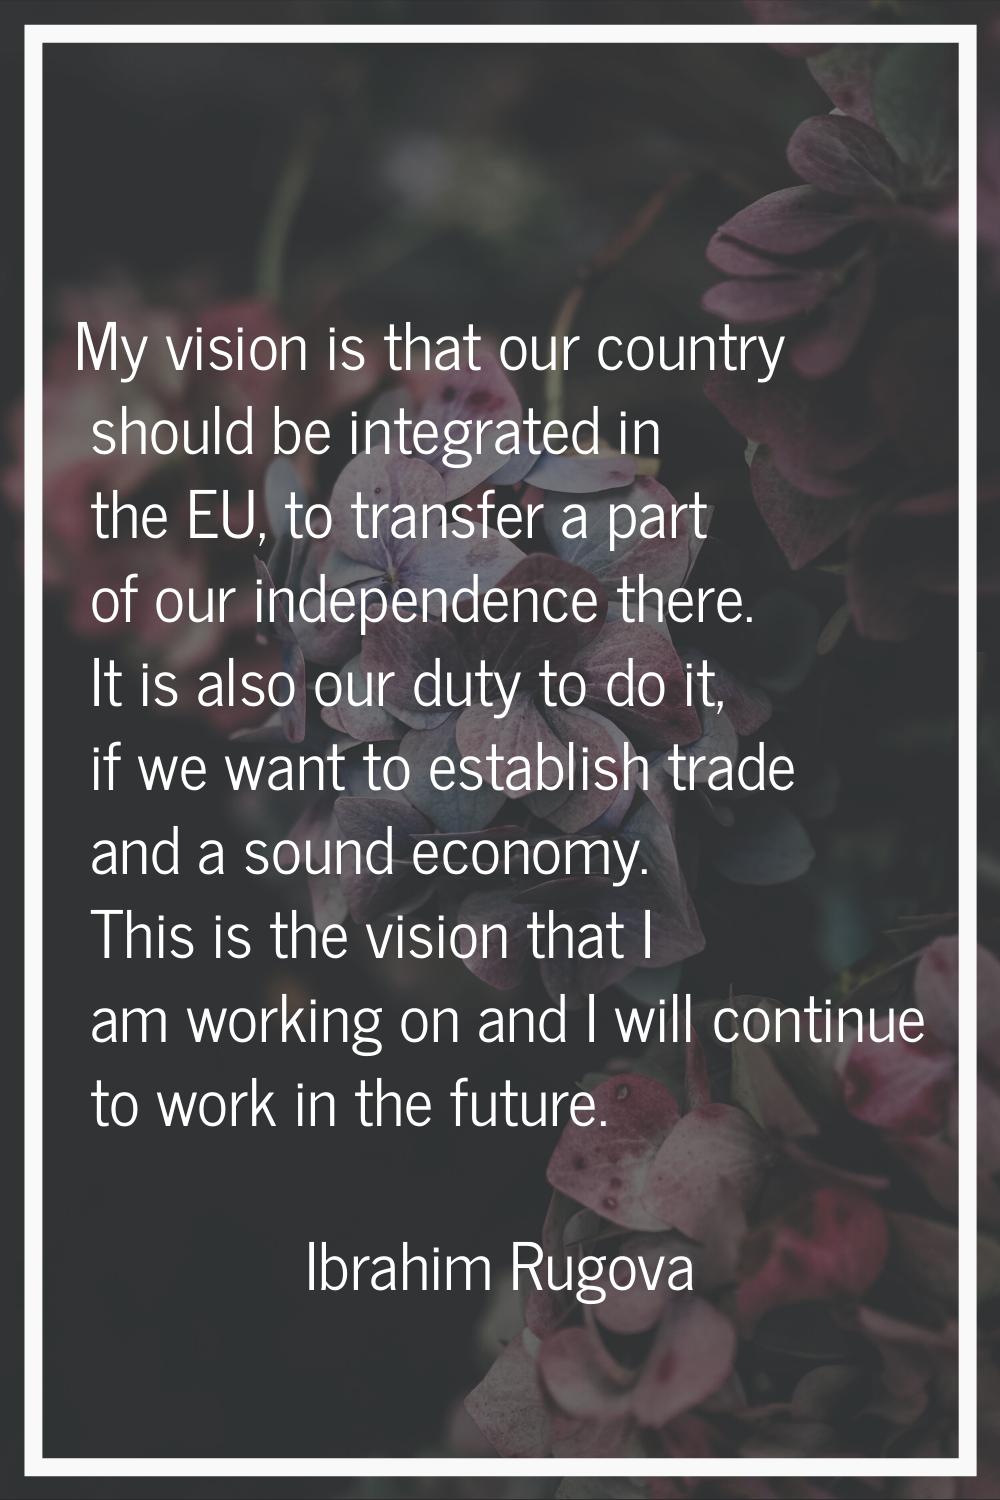 My vision is that our country should be integrated in the EU, to transfer a part of our independenc